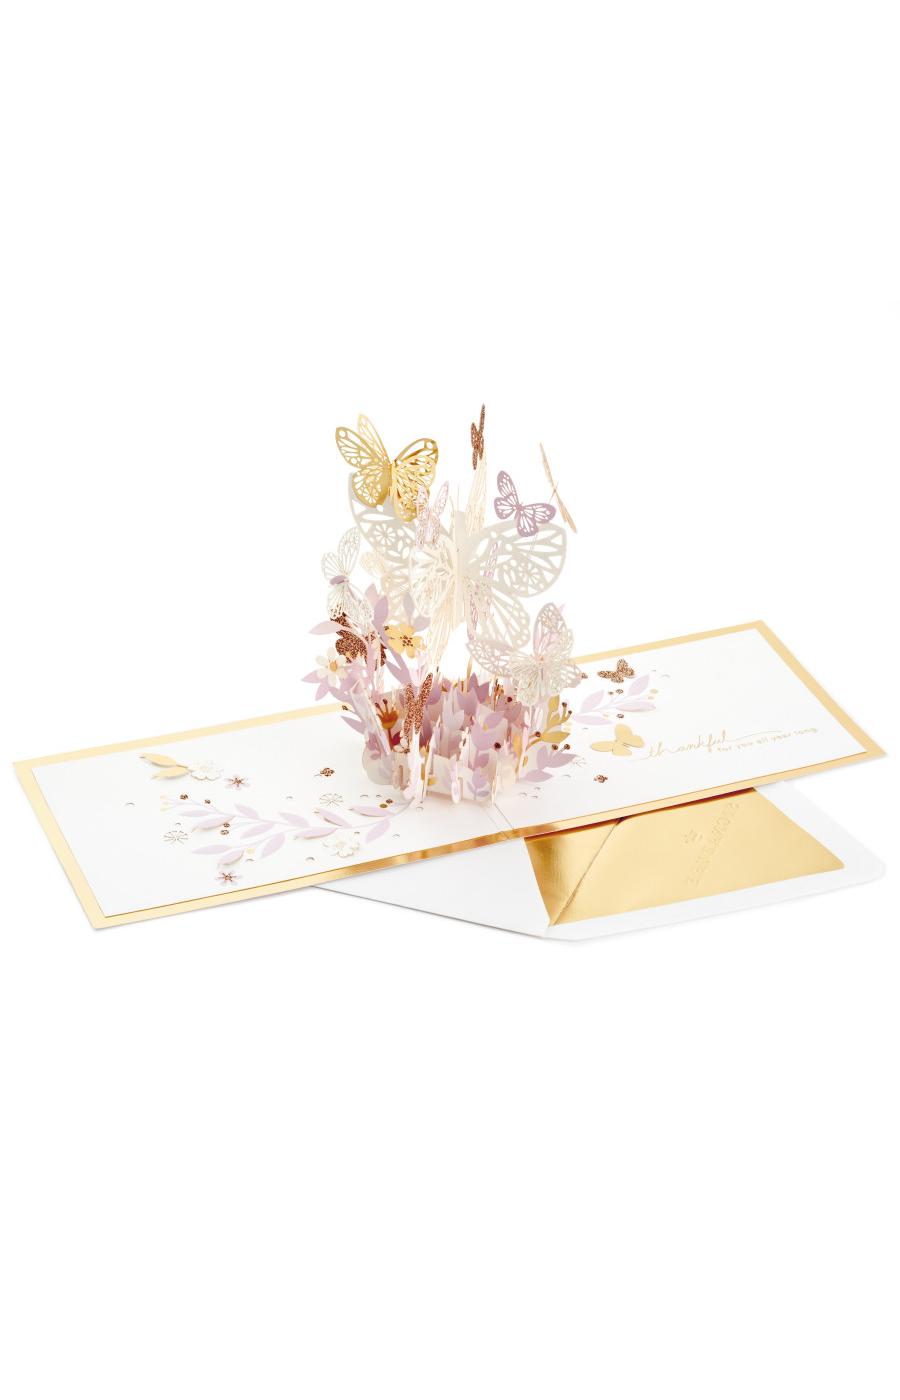 Hallmark Signature Thankful for You Pop-Up 3D Thinking of You Card - E48; image 1 of 7